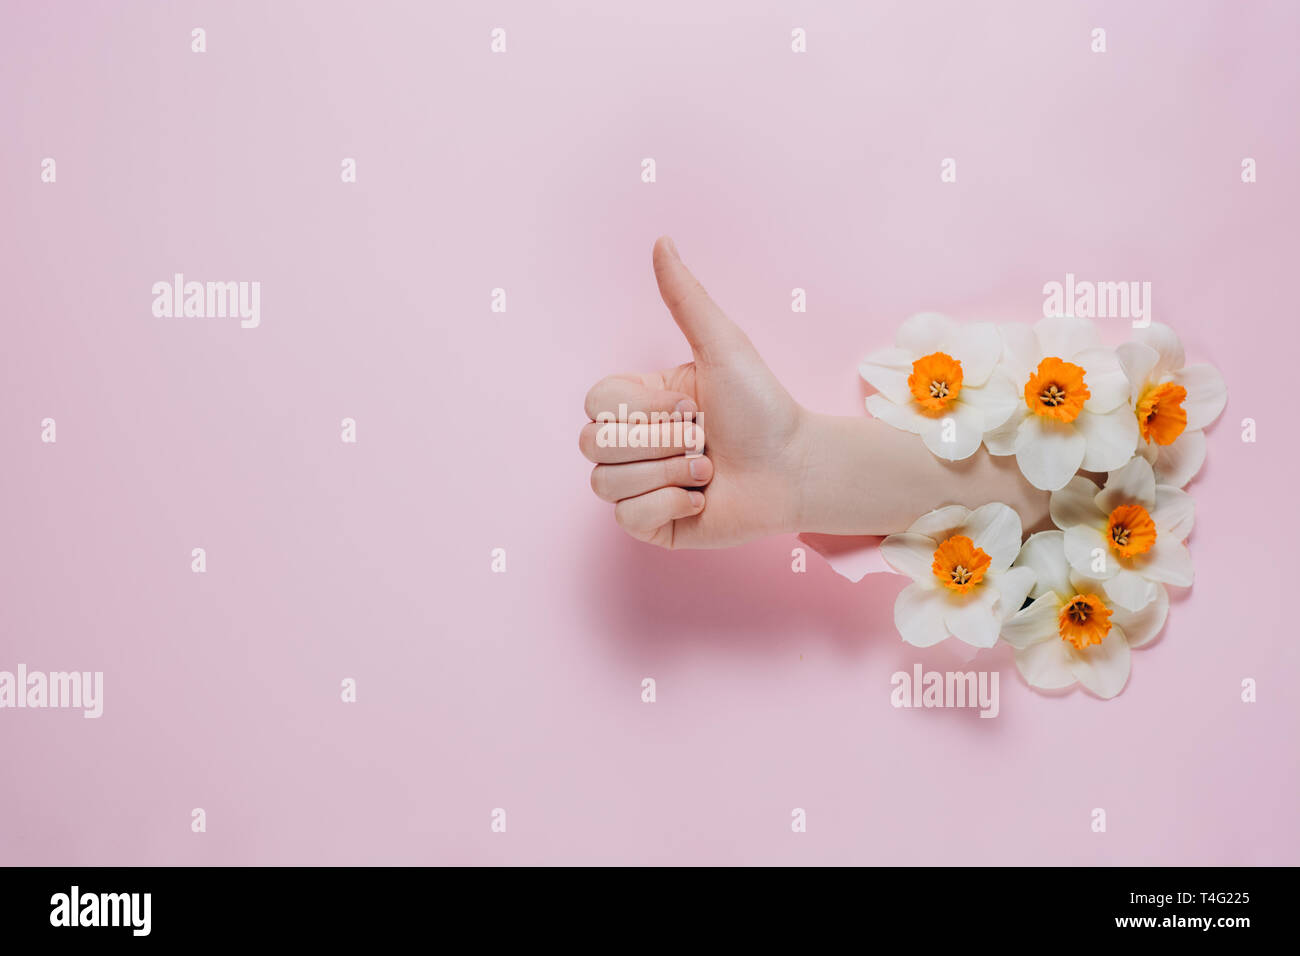 Female hand shows a gesture of approval, can be seen through a hole in pink paper with flowers. Body language concept. Stock Photo